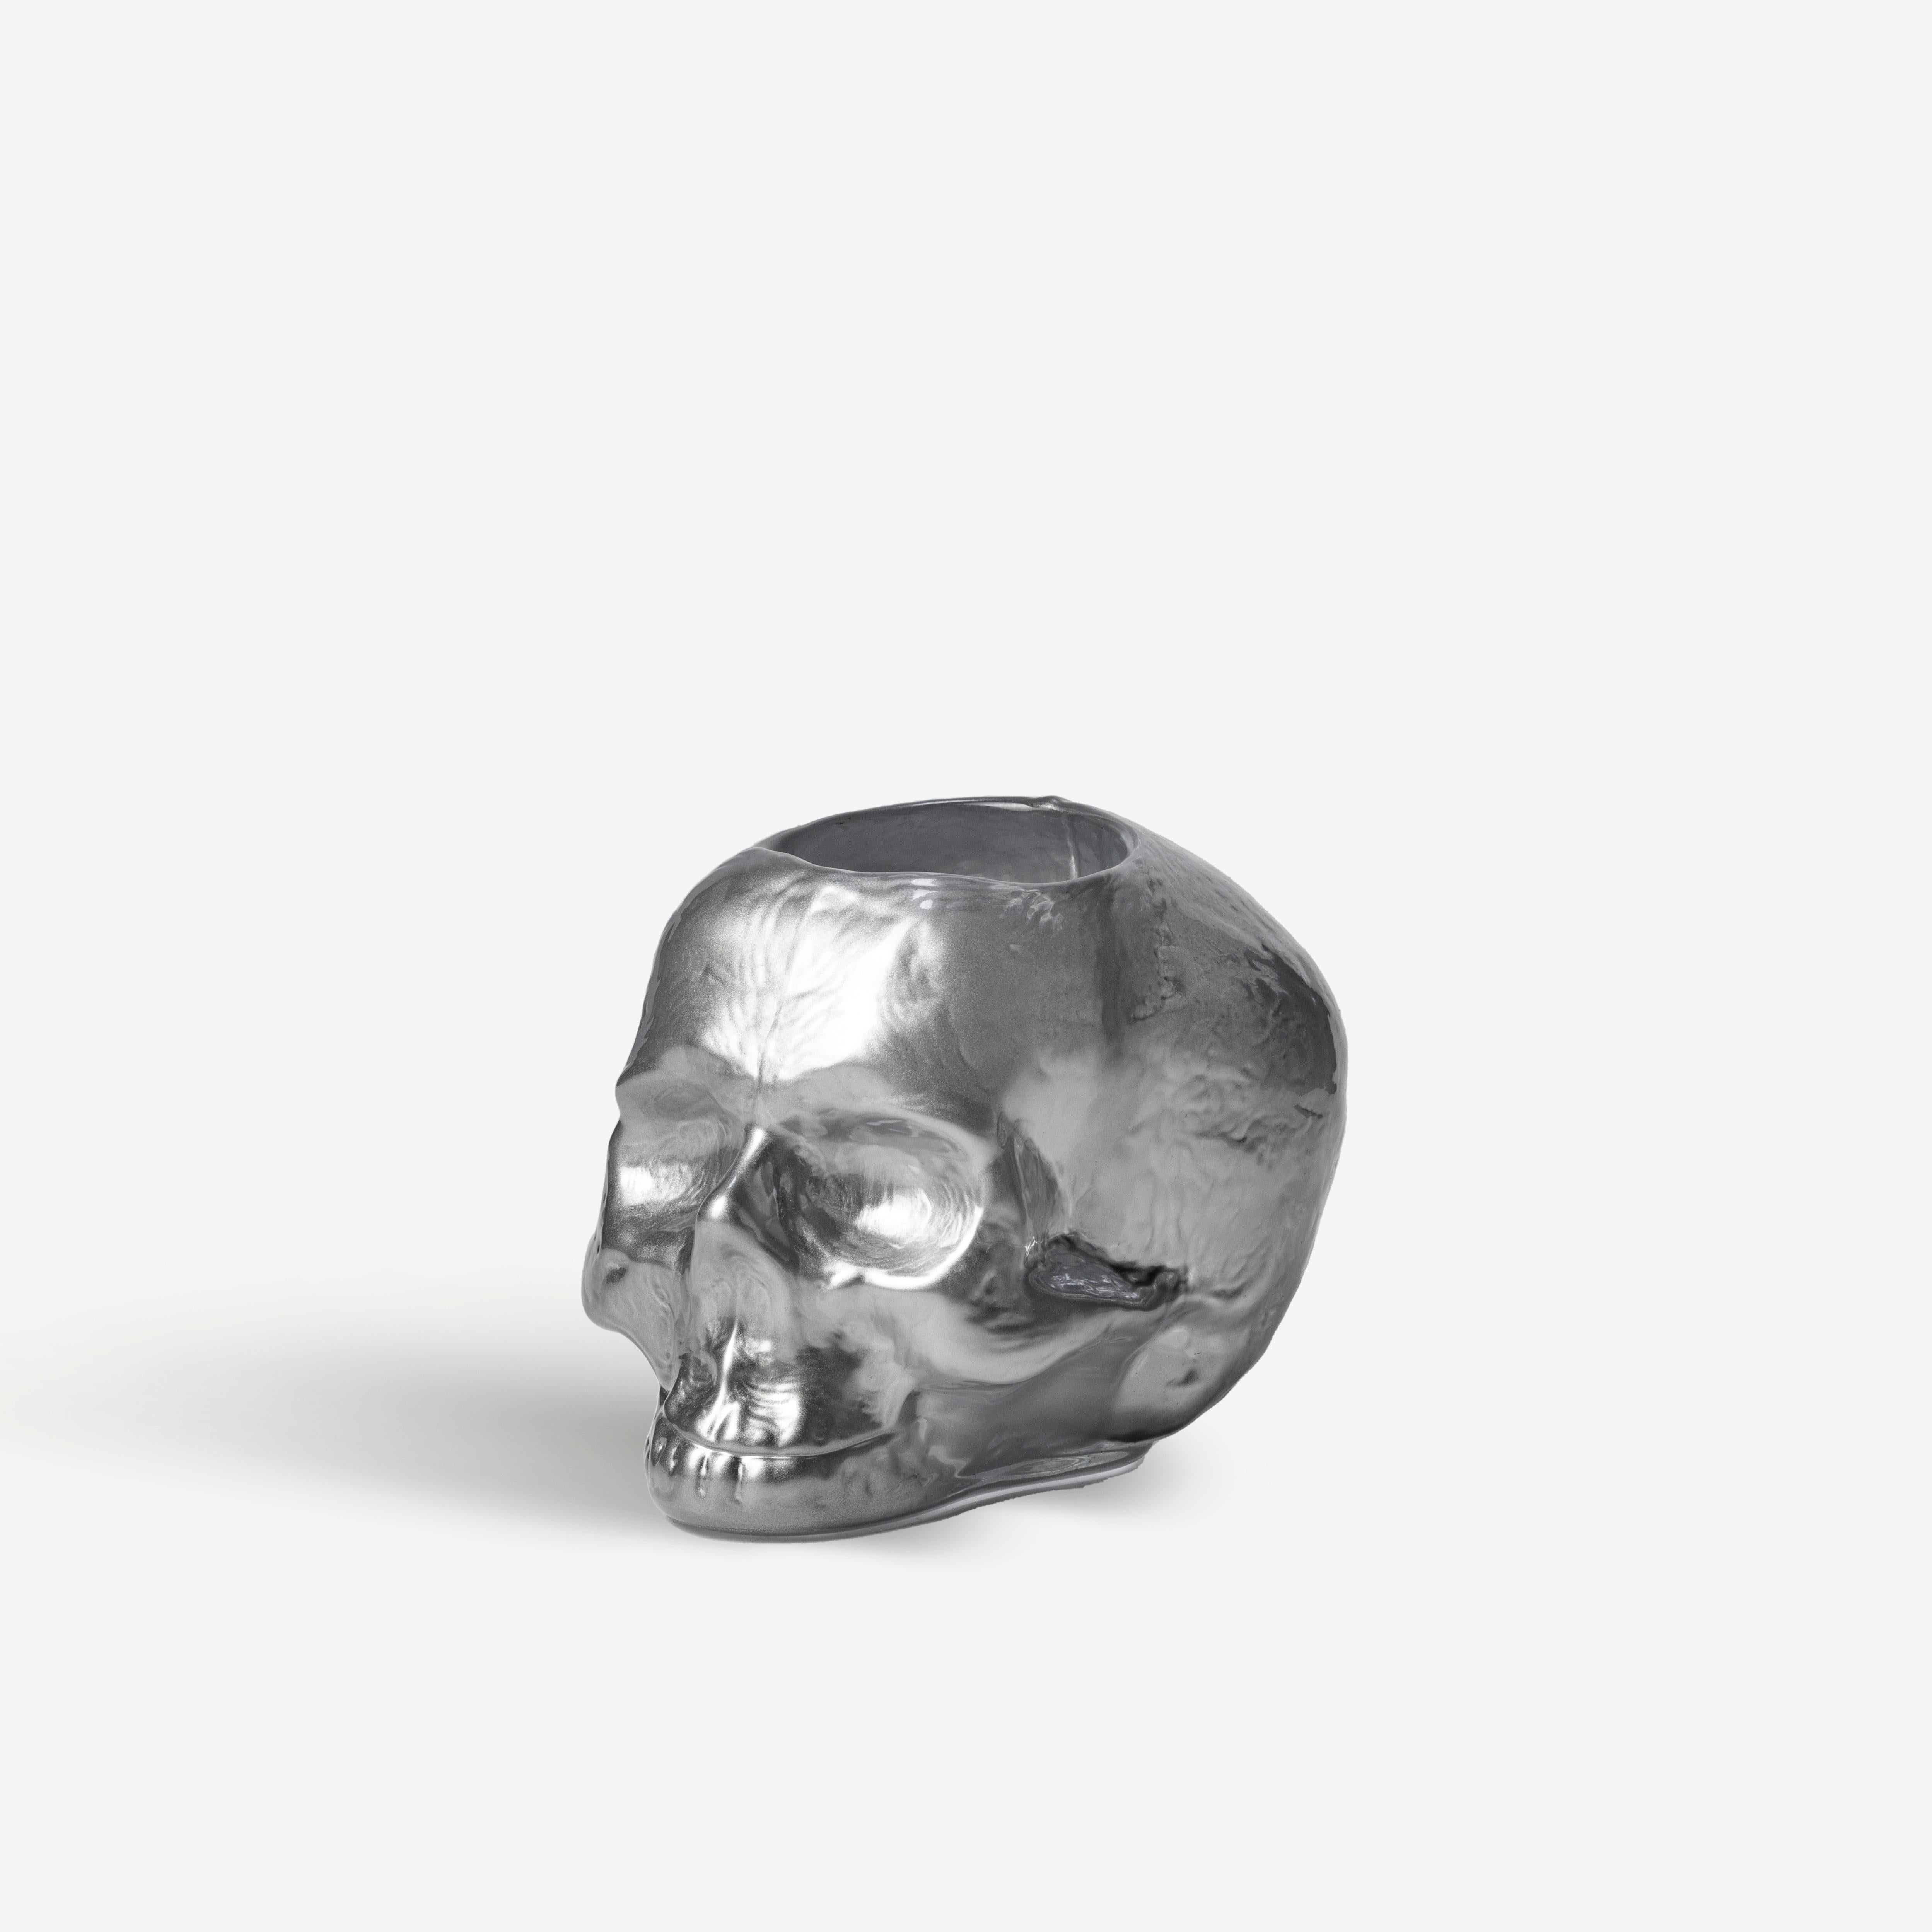 What a bright idea! The Still Life votive is a cool, skull-shaped candle holder available in different colors. Light up your home with your favorite from Kosta Boda. To be or not to be, that's the question. Design by Ludvig Löfgren.